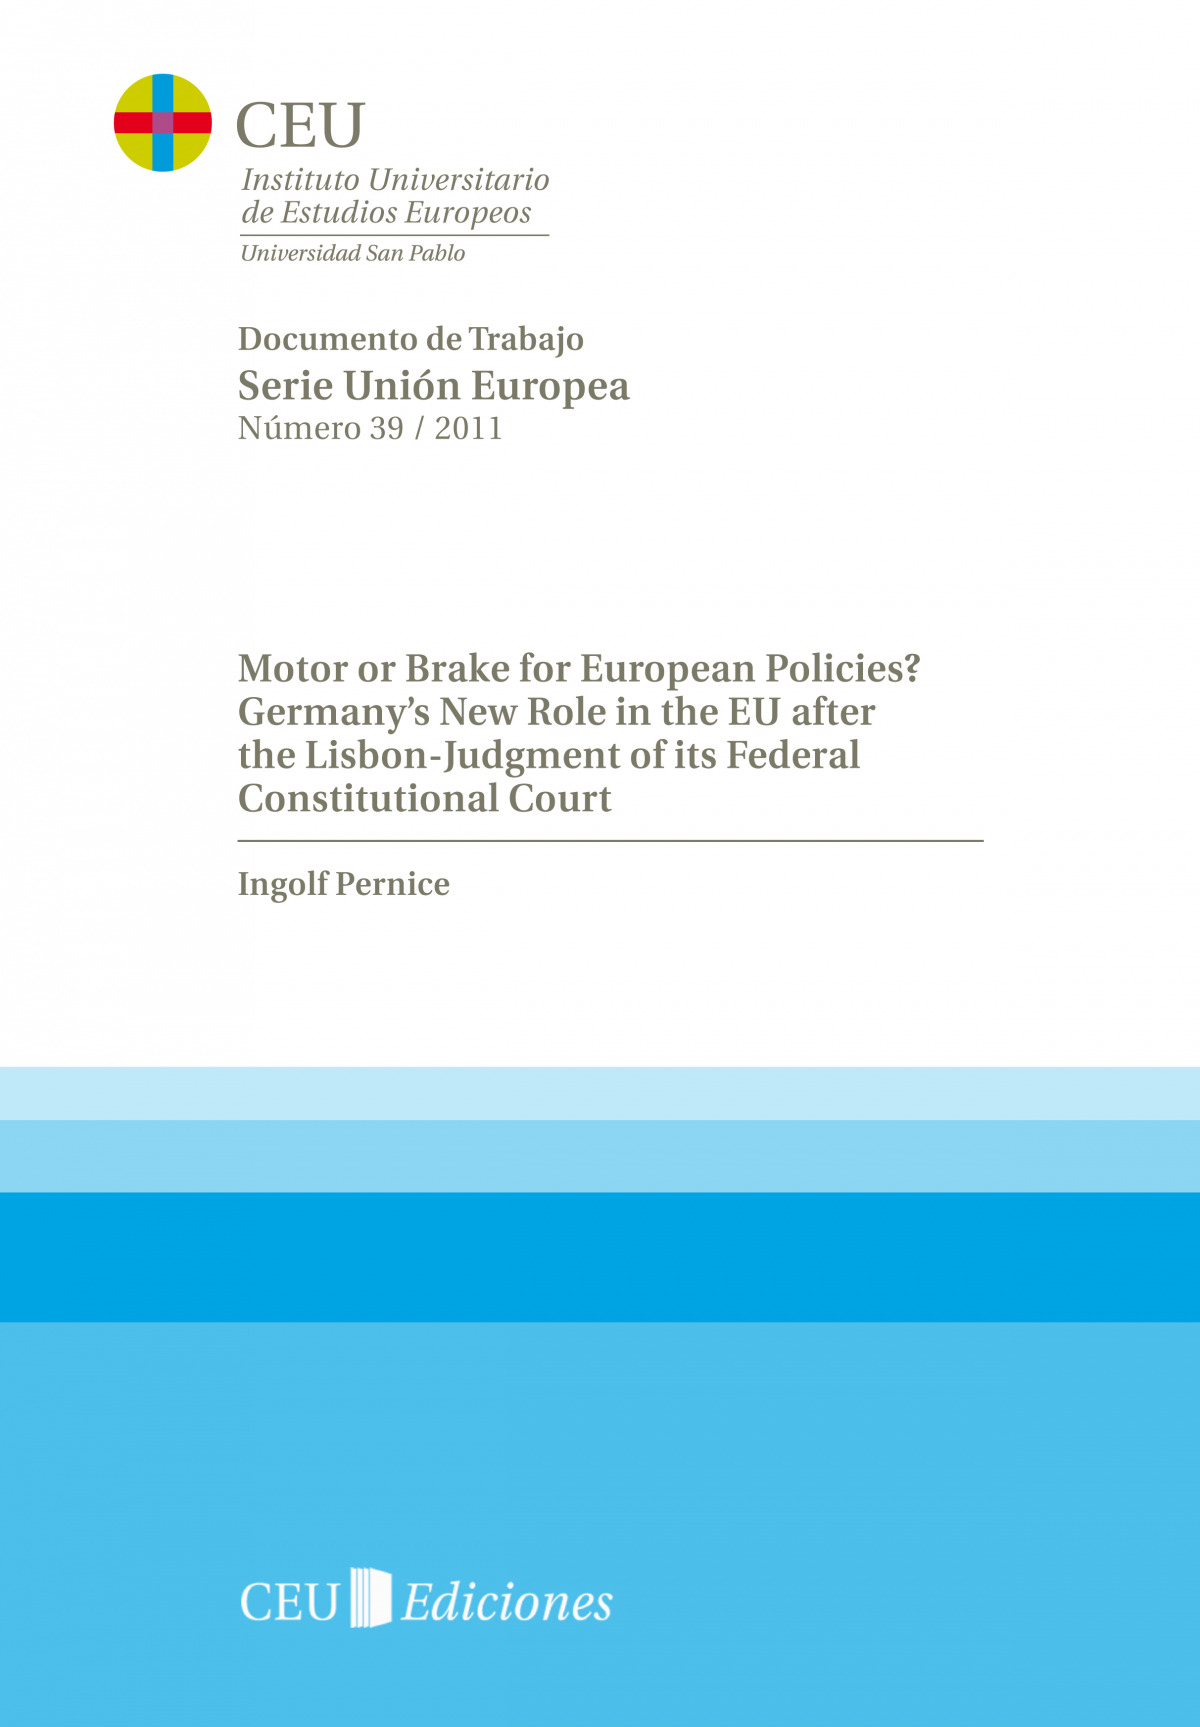 Motor or brake for European policies Germany s new role in the EU after the Lis - Pernice, Ingolf